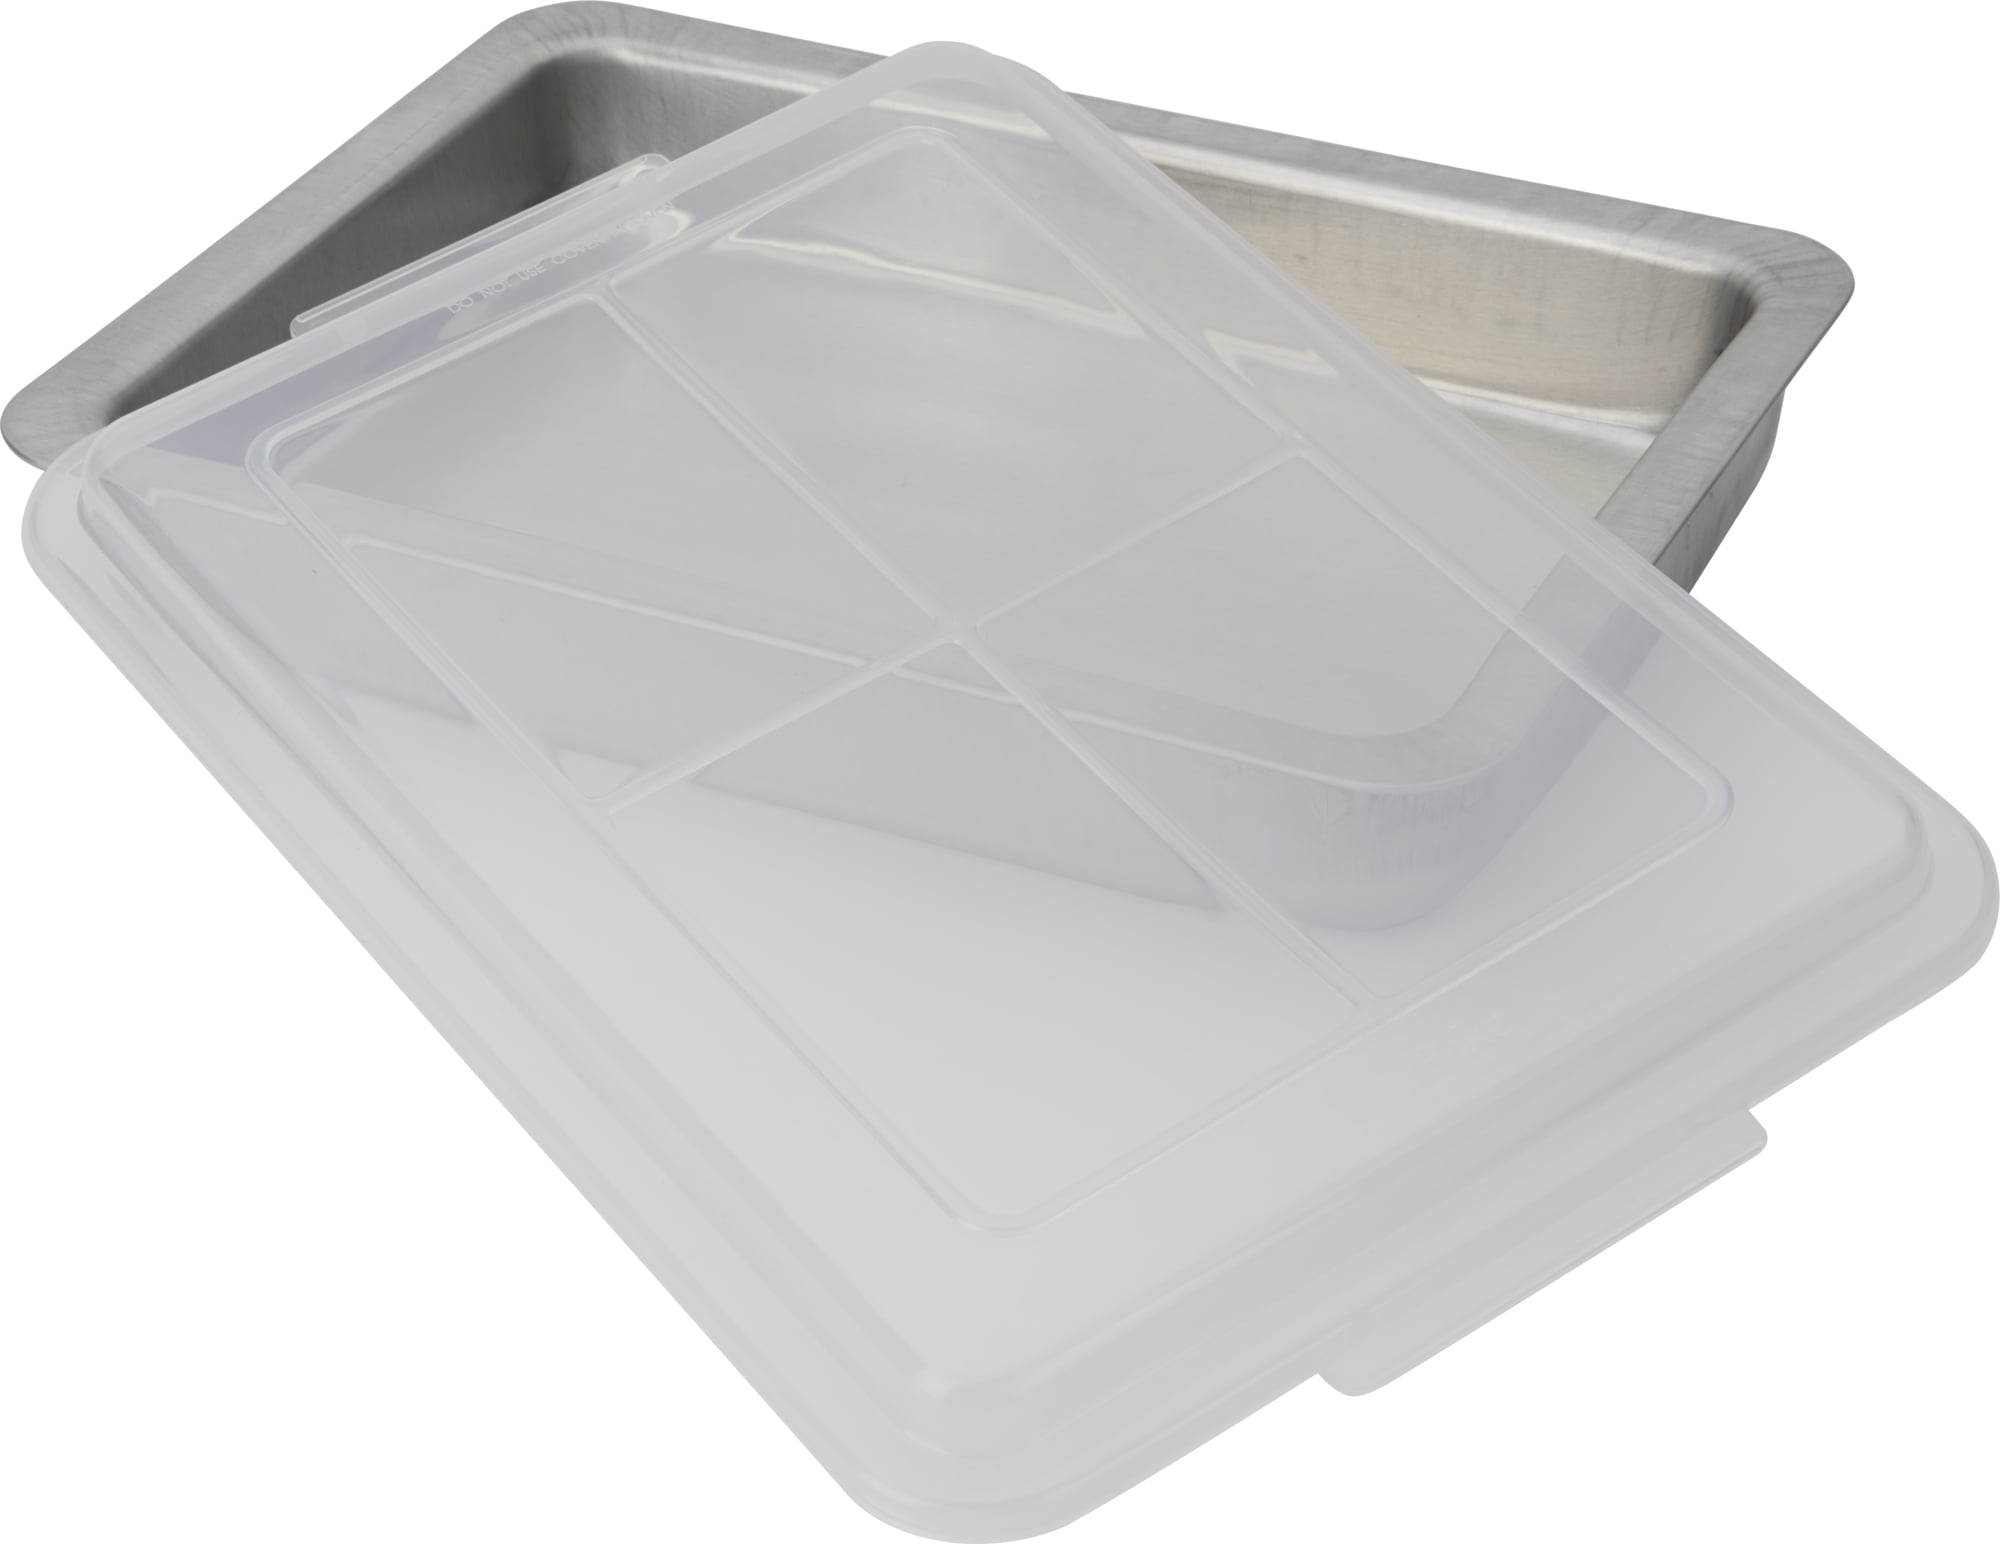 Wearever AirBake Cake Pan, Covered, 13 x 9 x 2-1/4-In. Covered